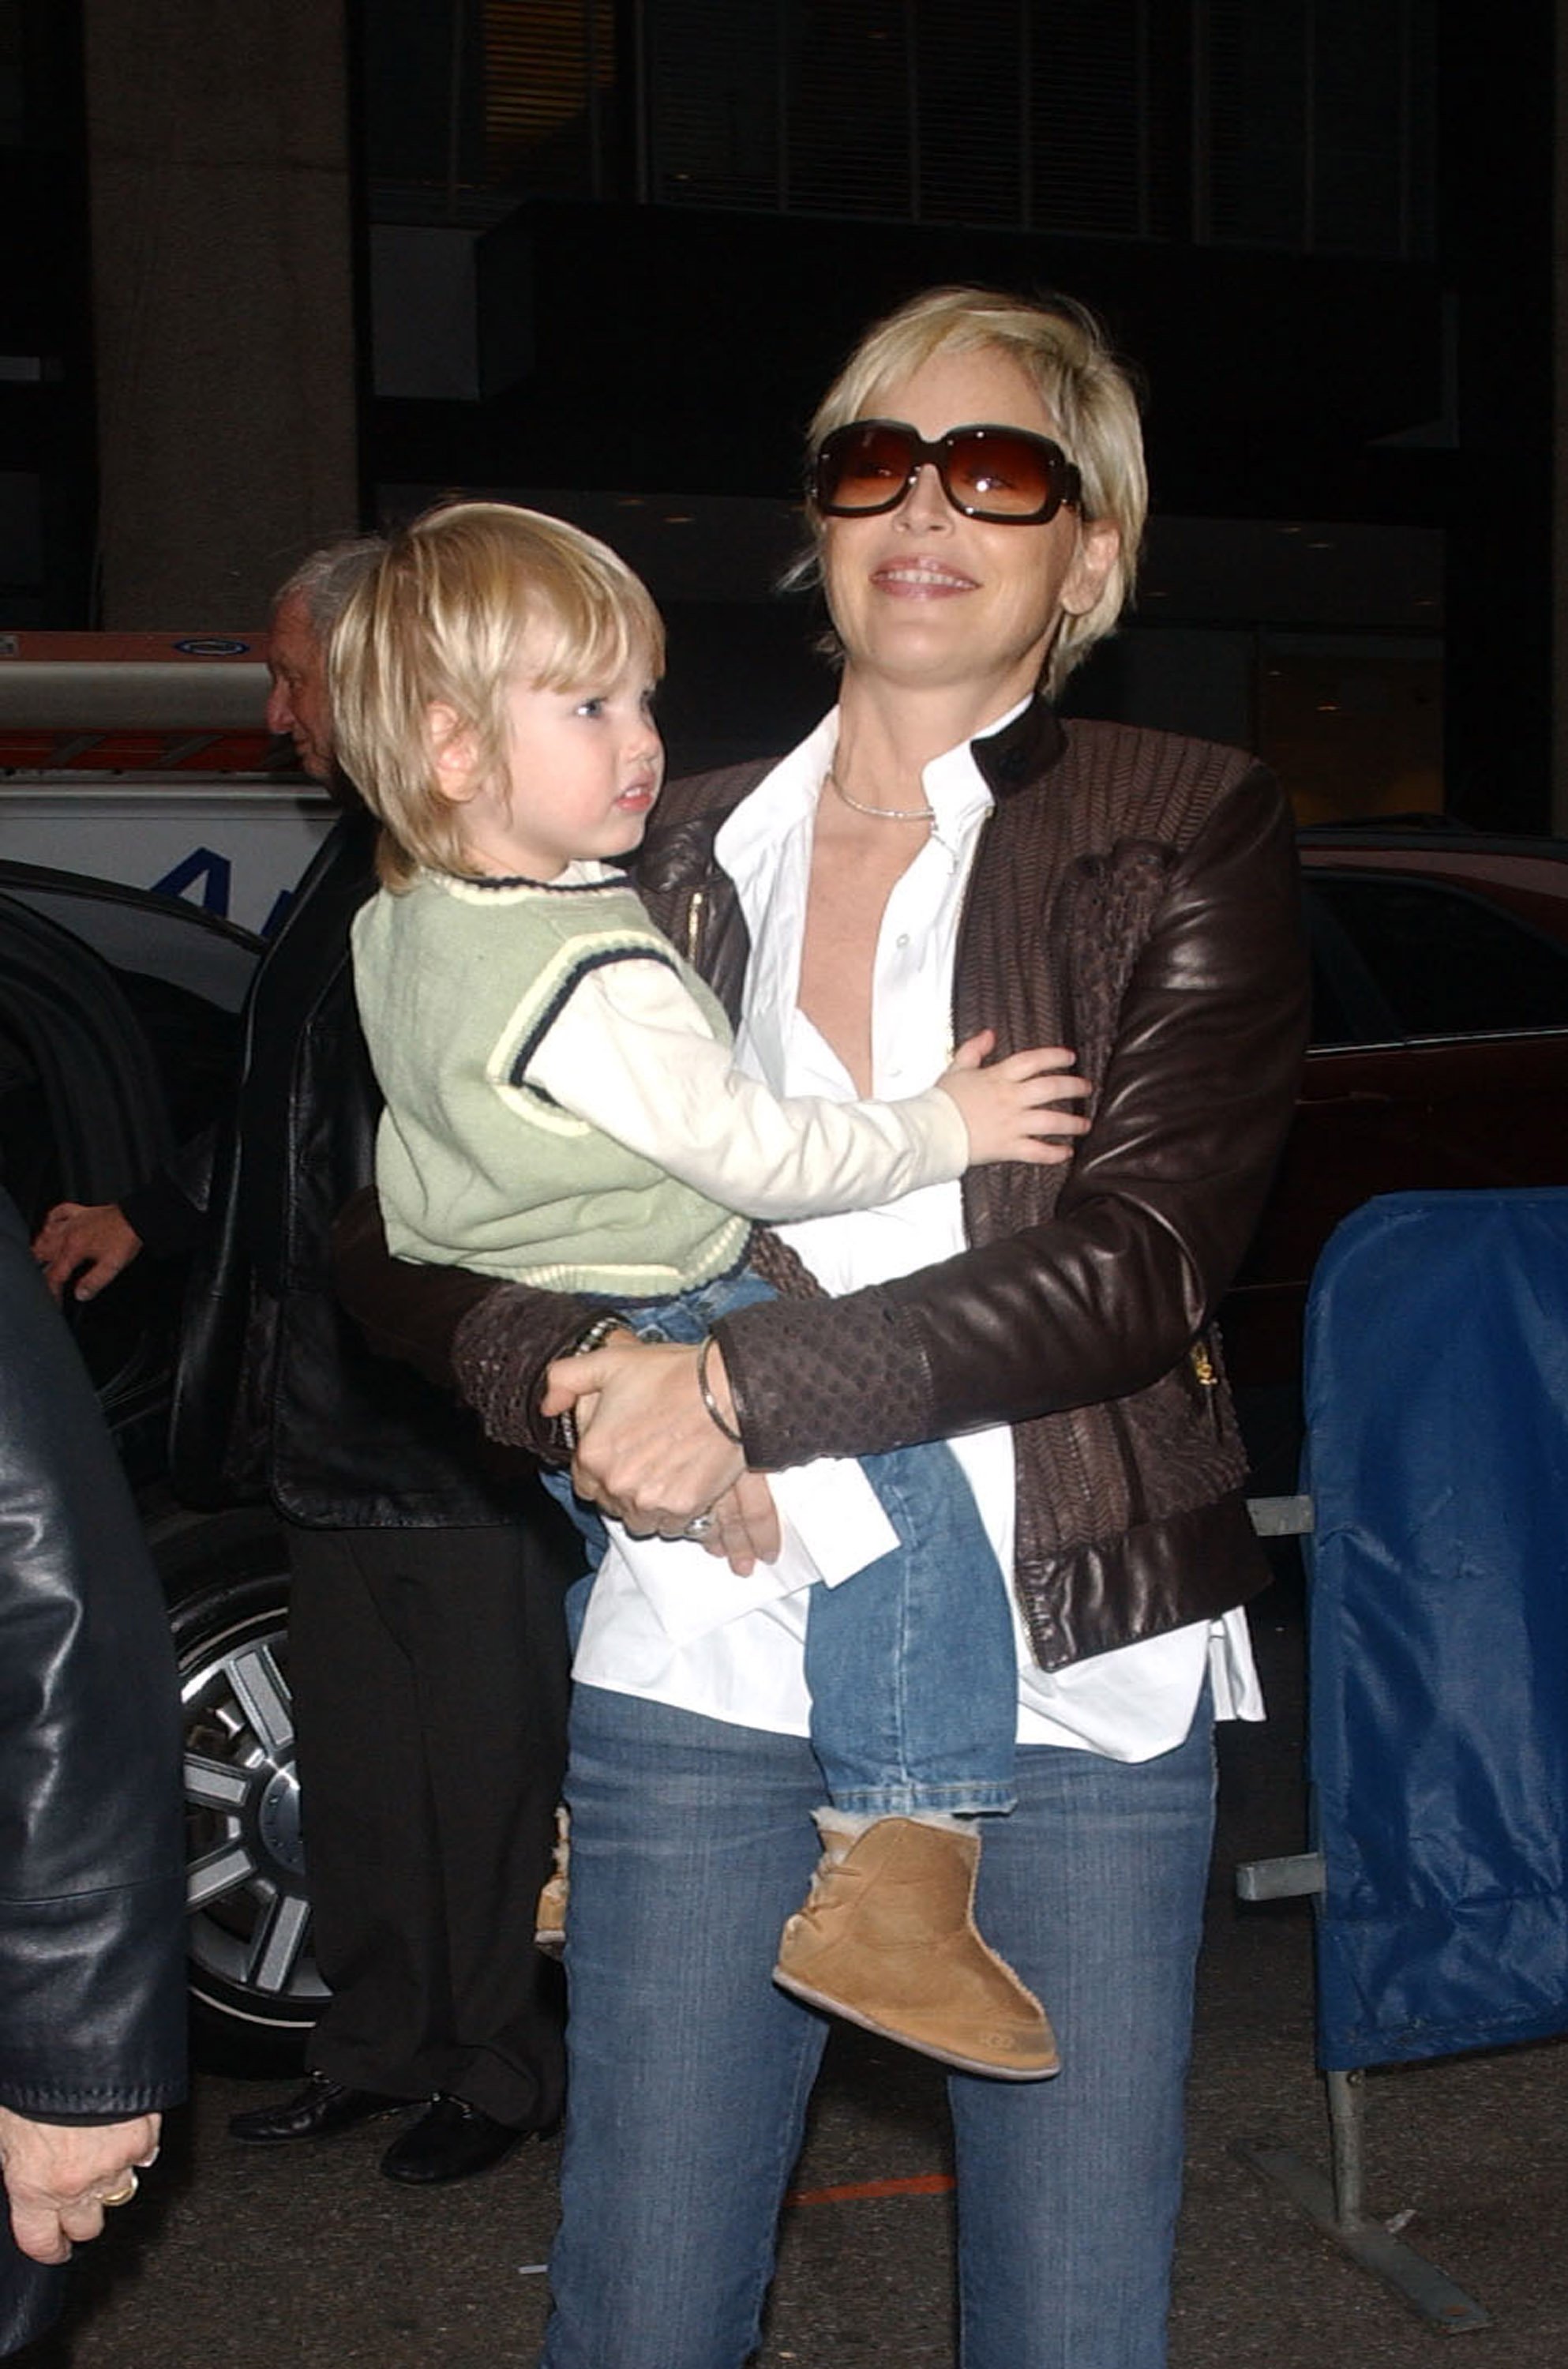 Sharon Stone with her son Roan on November 14, 2007 in New York City. | Photo: Getty Images